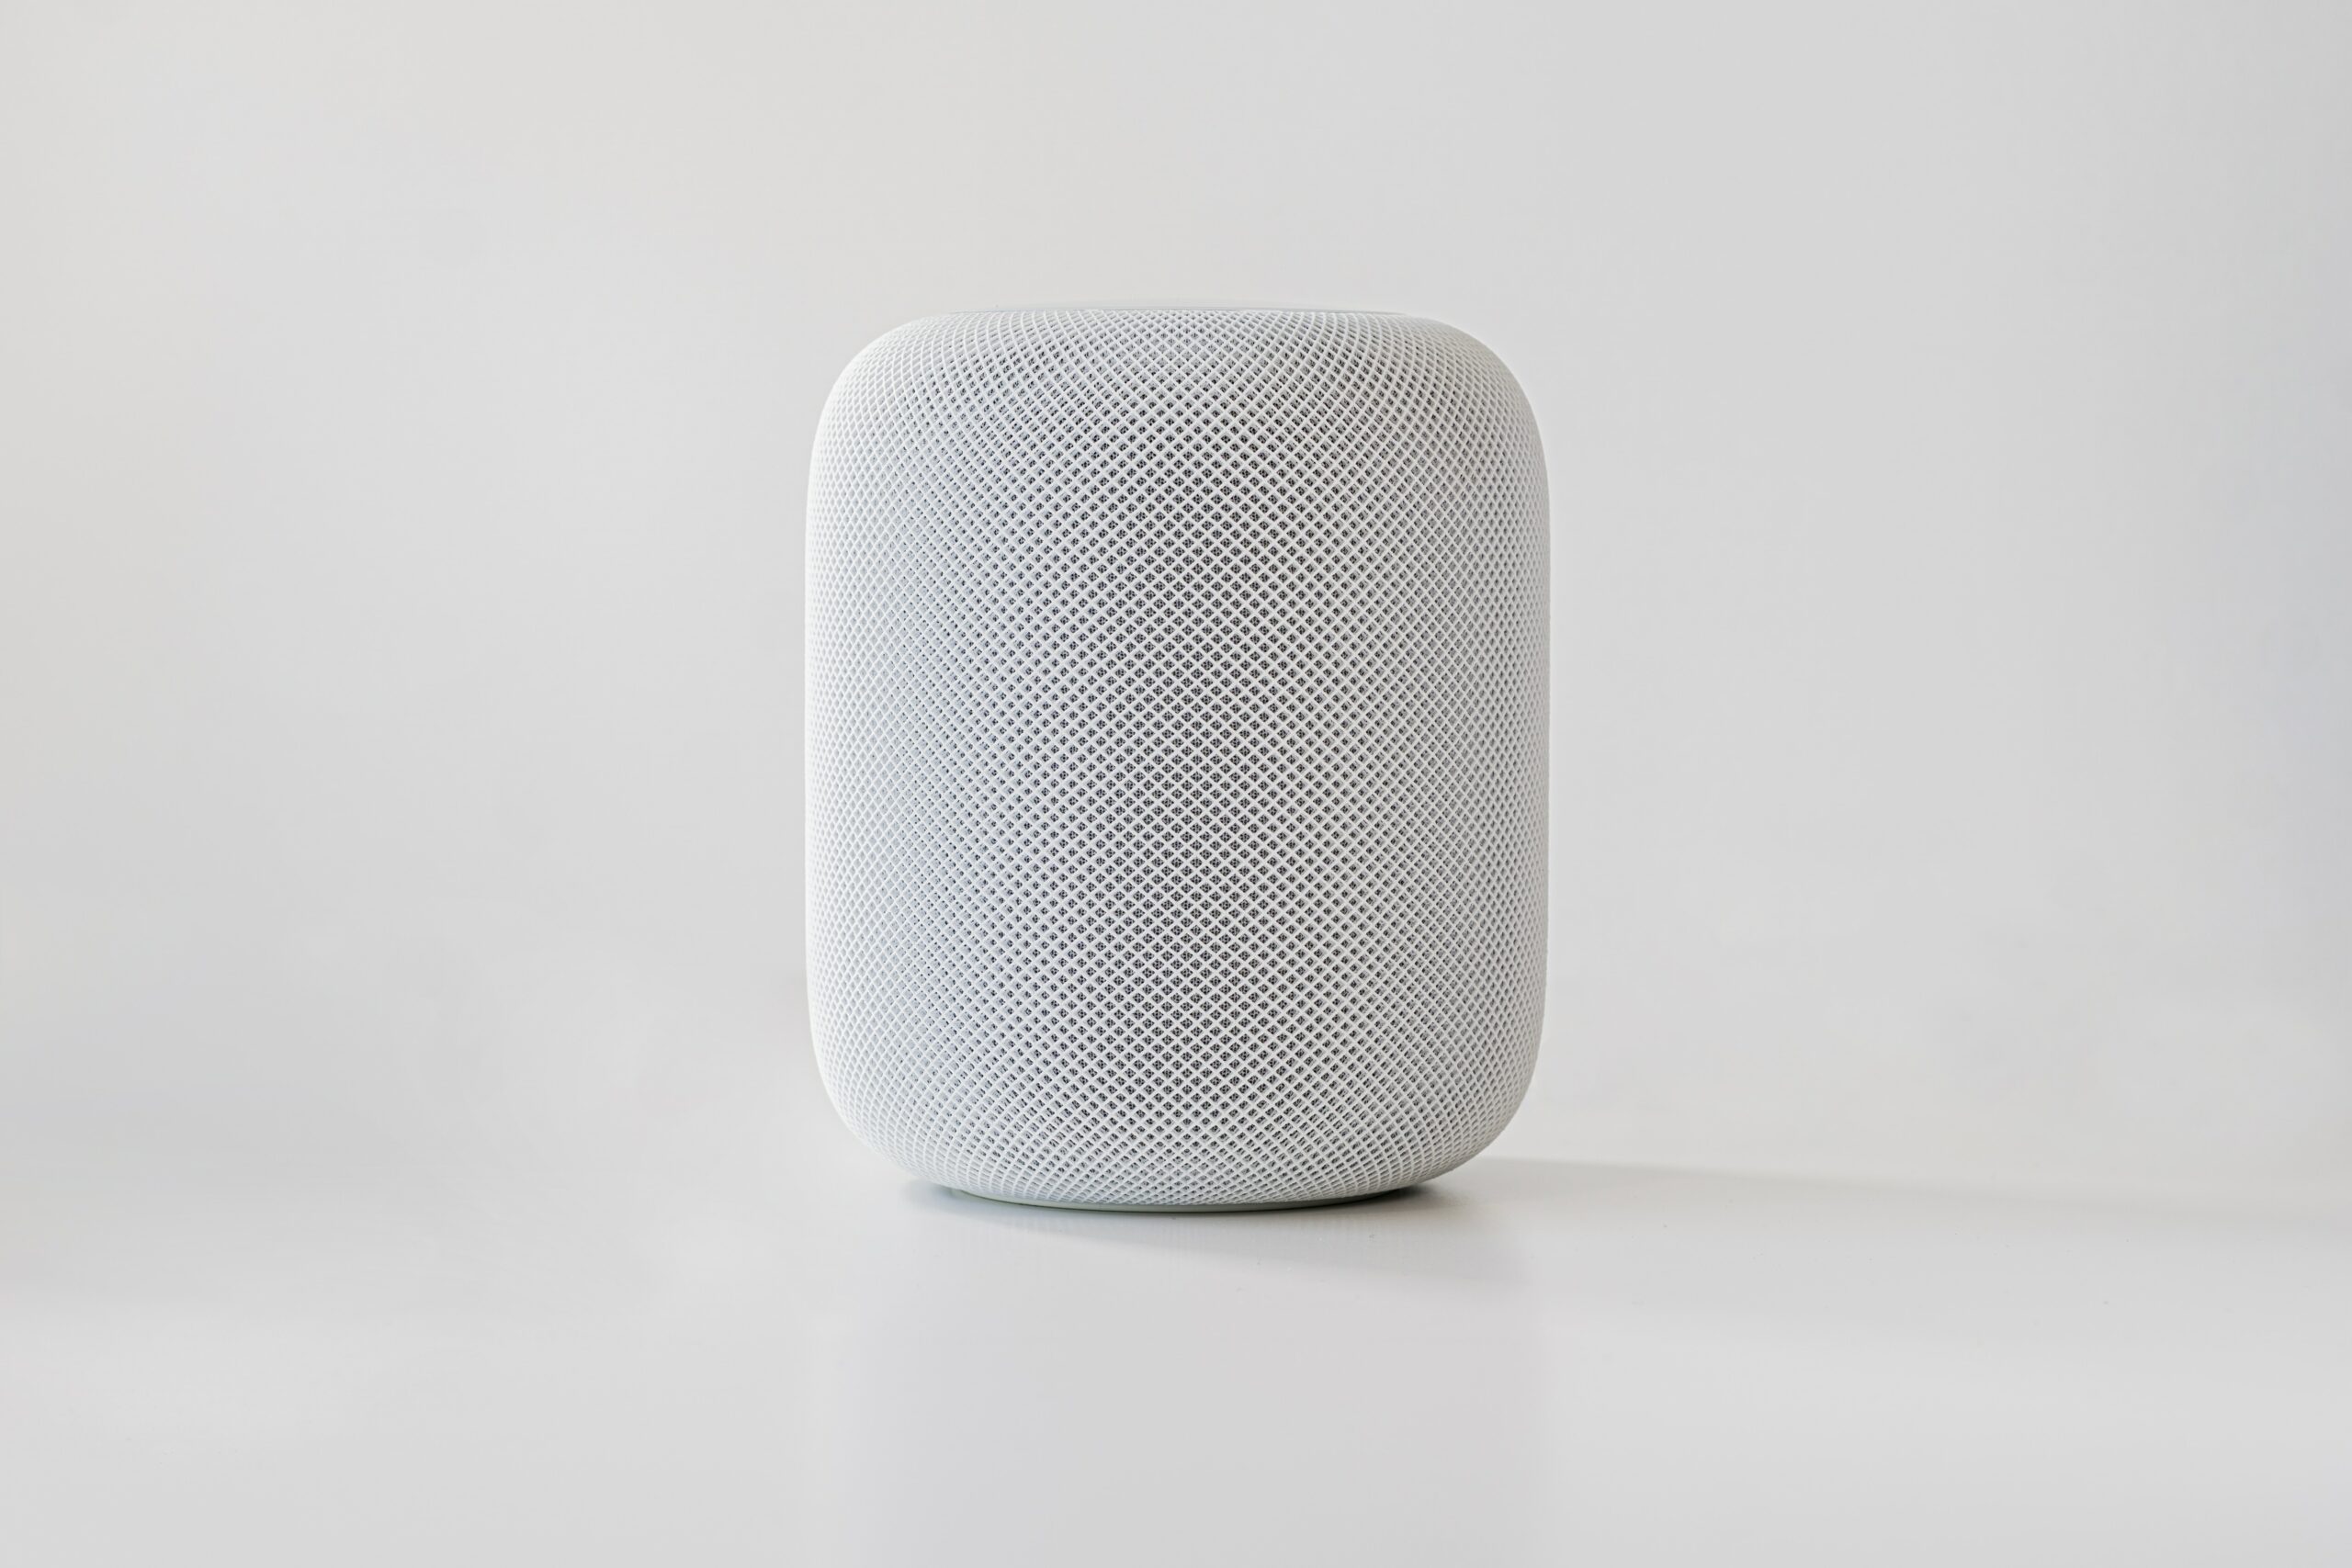 How to Stop HomePod Always Listening